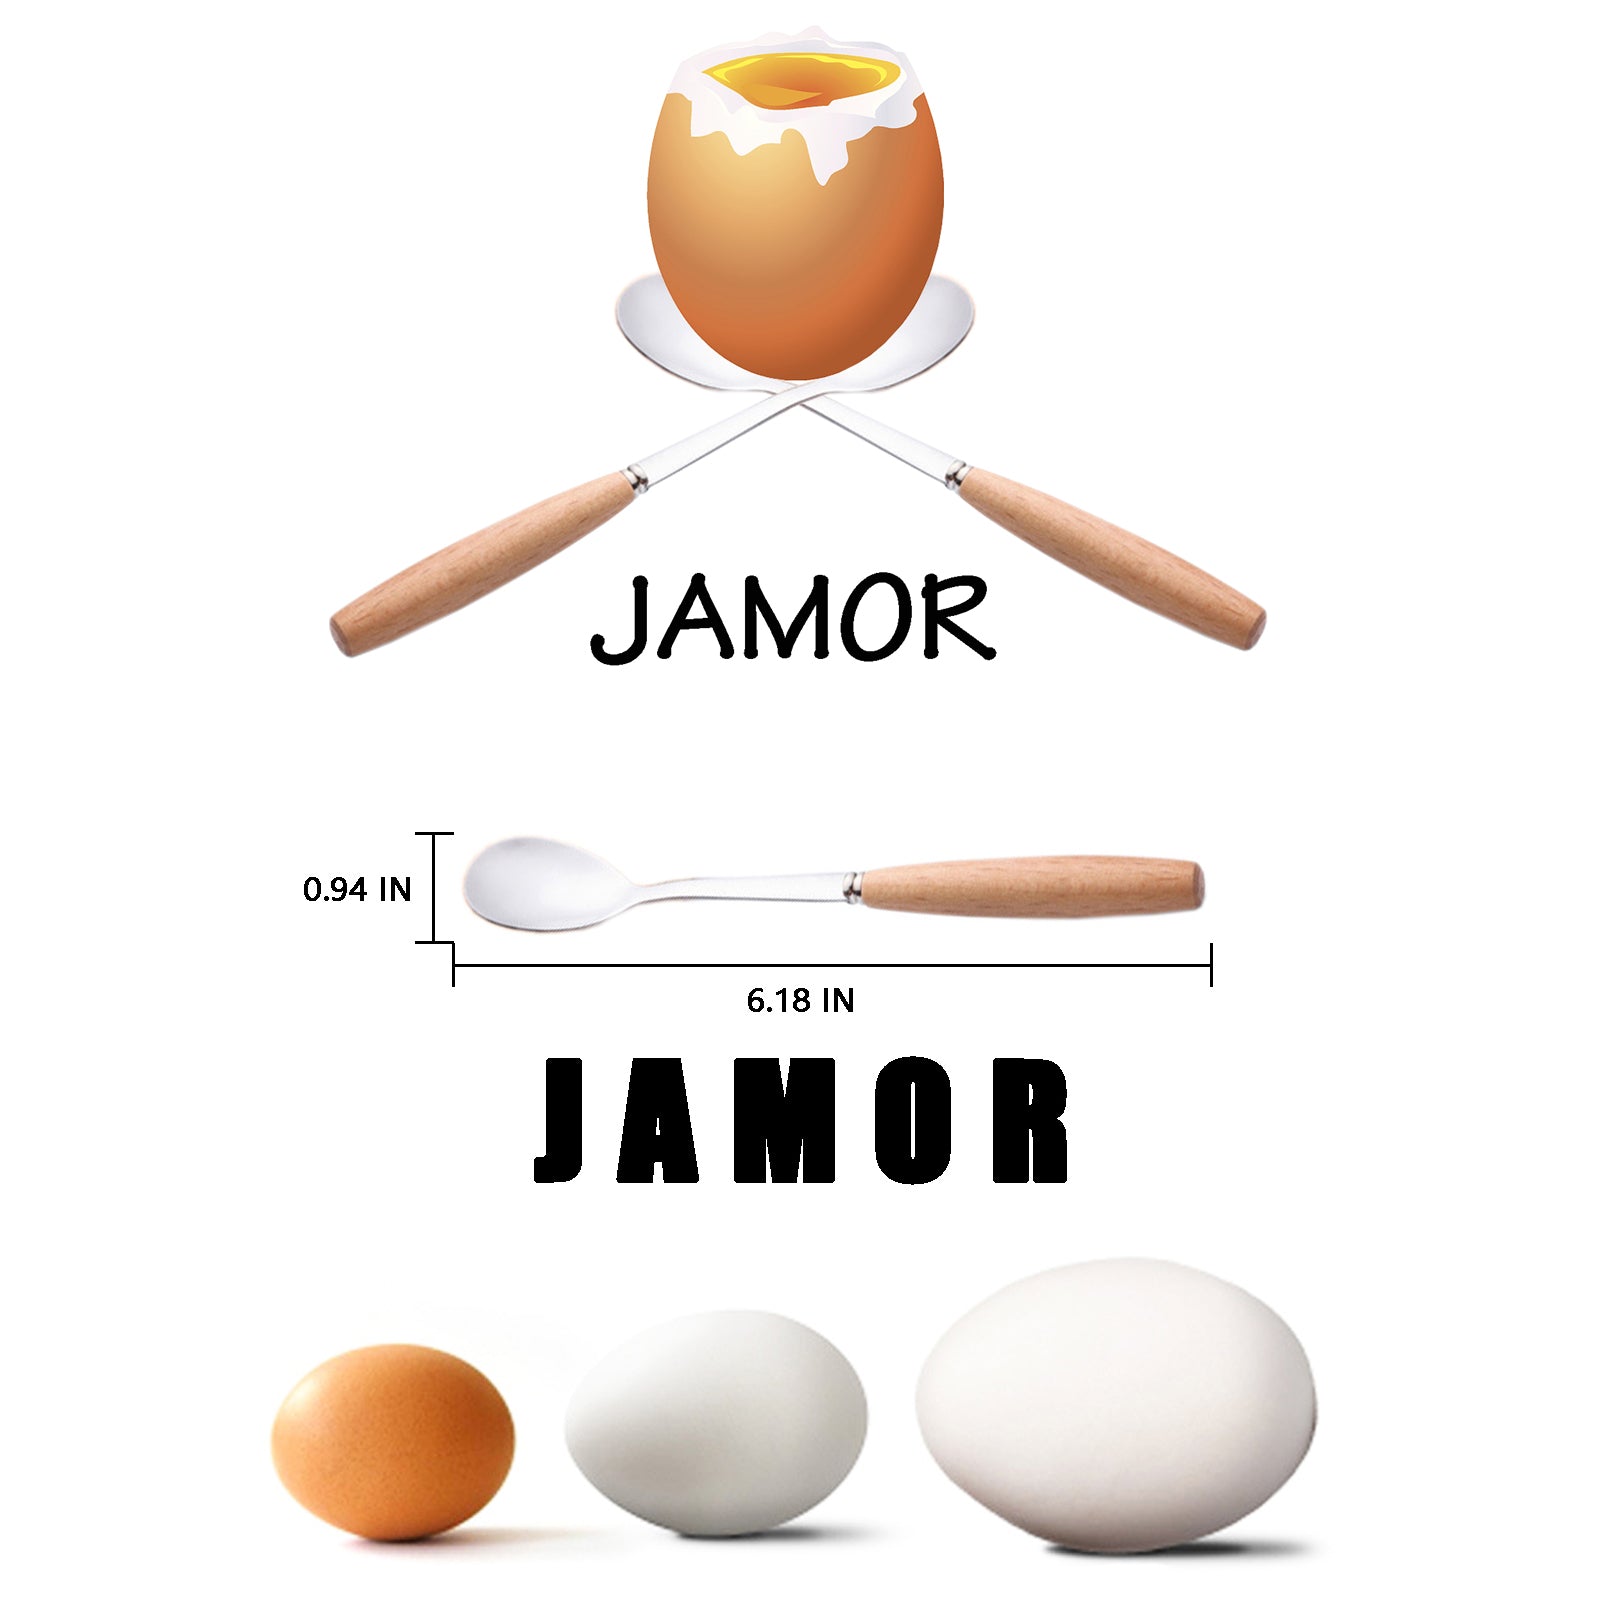 JAMOR Stainless Steel Egg Spoon With Wooden Handle,Special Egg Spoon For Eating Eggs,Egg Cup Companion,6.18IN Stainless Steel Egg Spoon